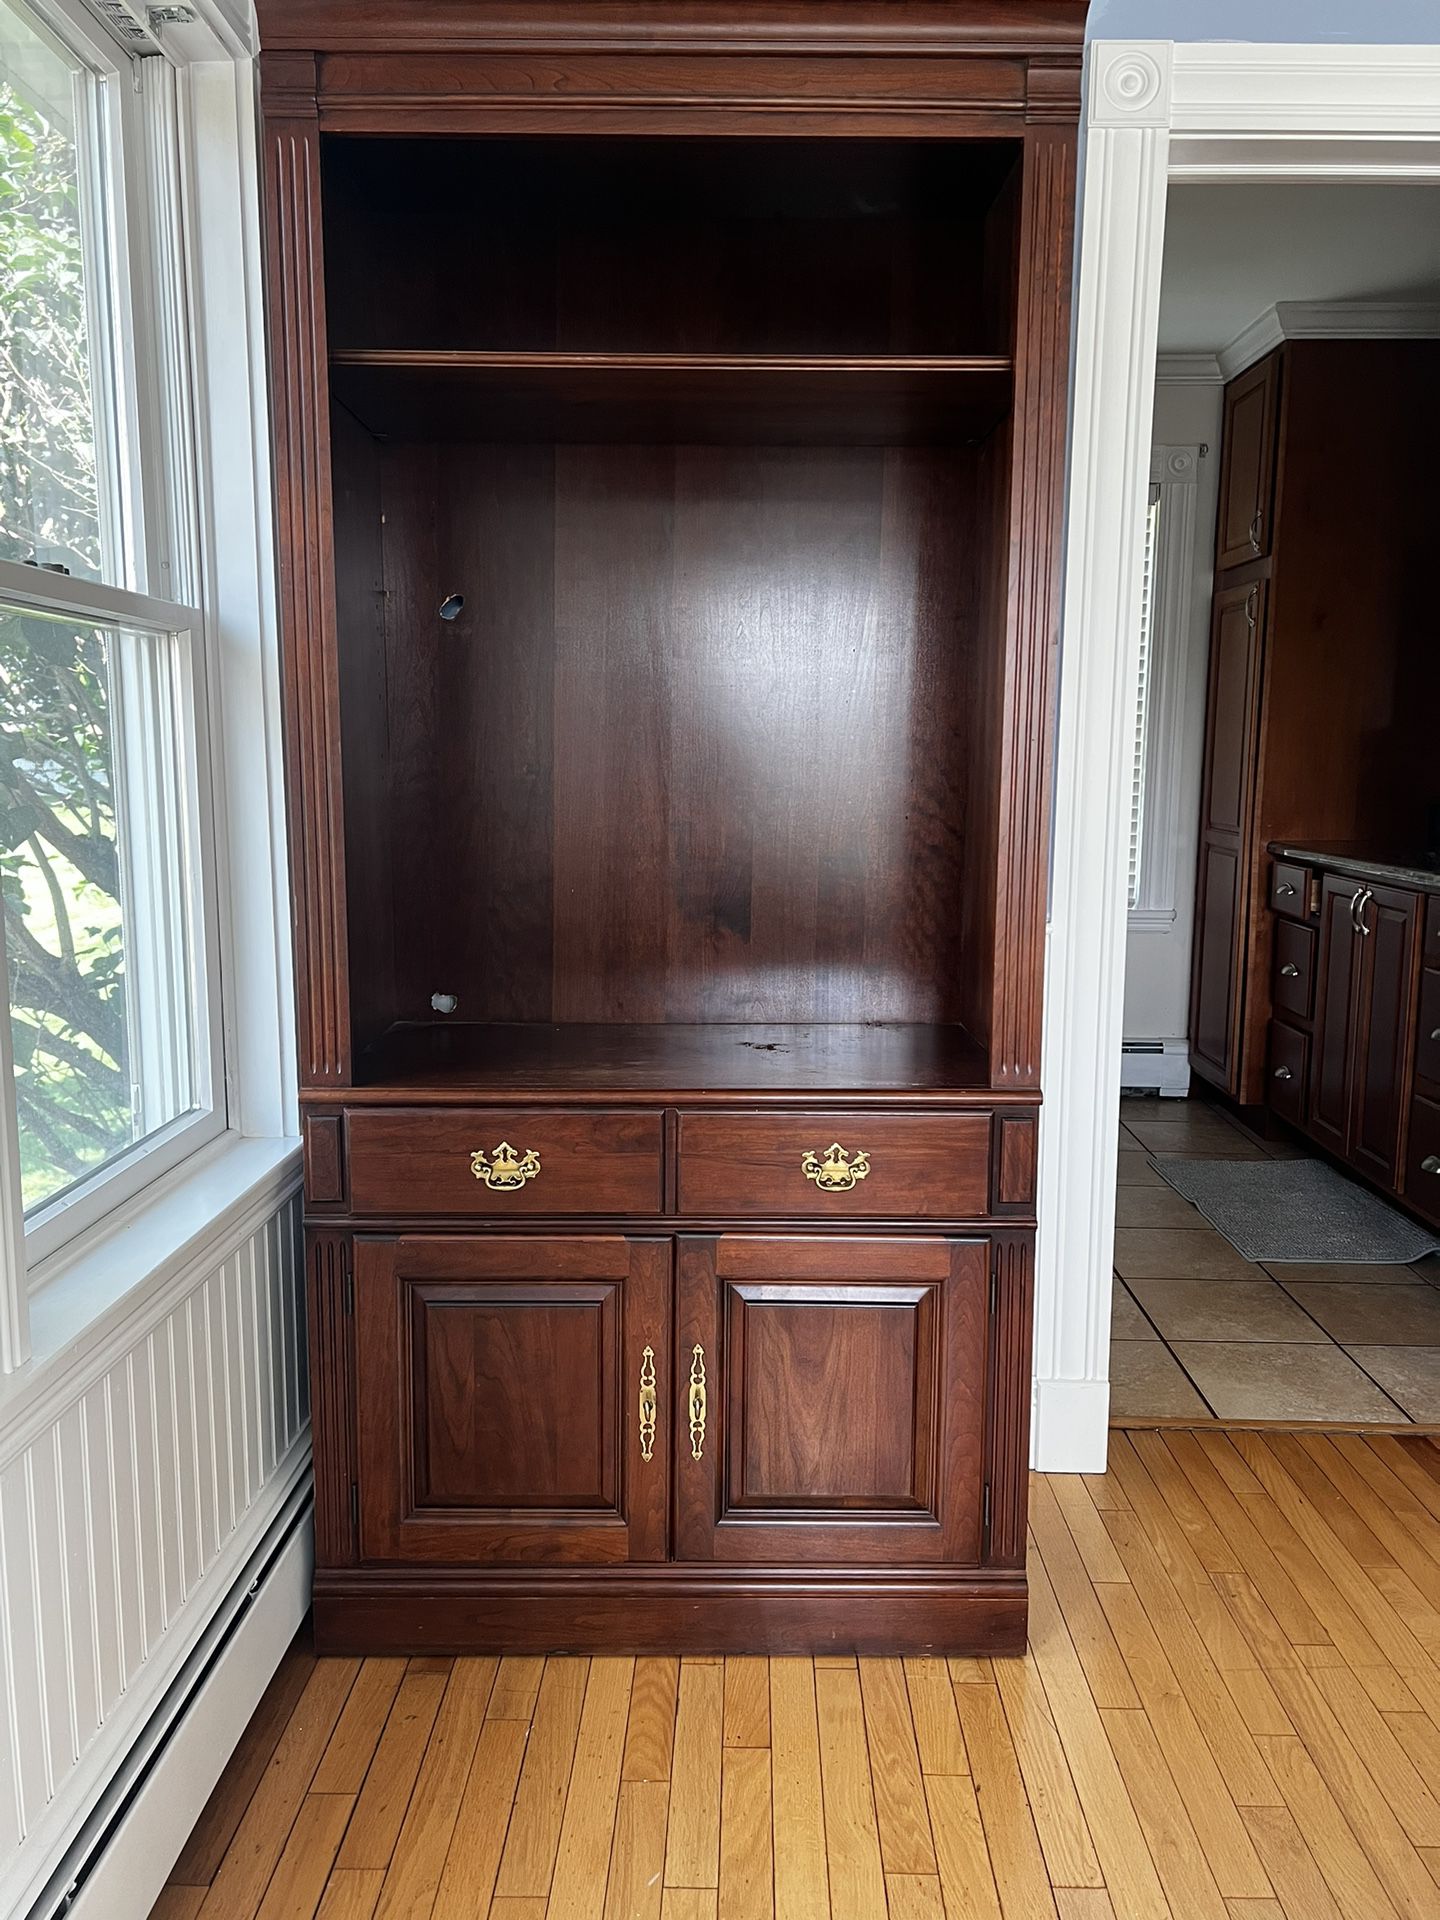 **MUST GO THIS WEEKEND!** Negotiable On Price - Pennsylvania House Bookcase (two Extra Shelves Included)